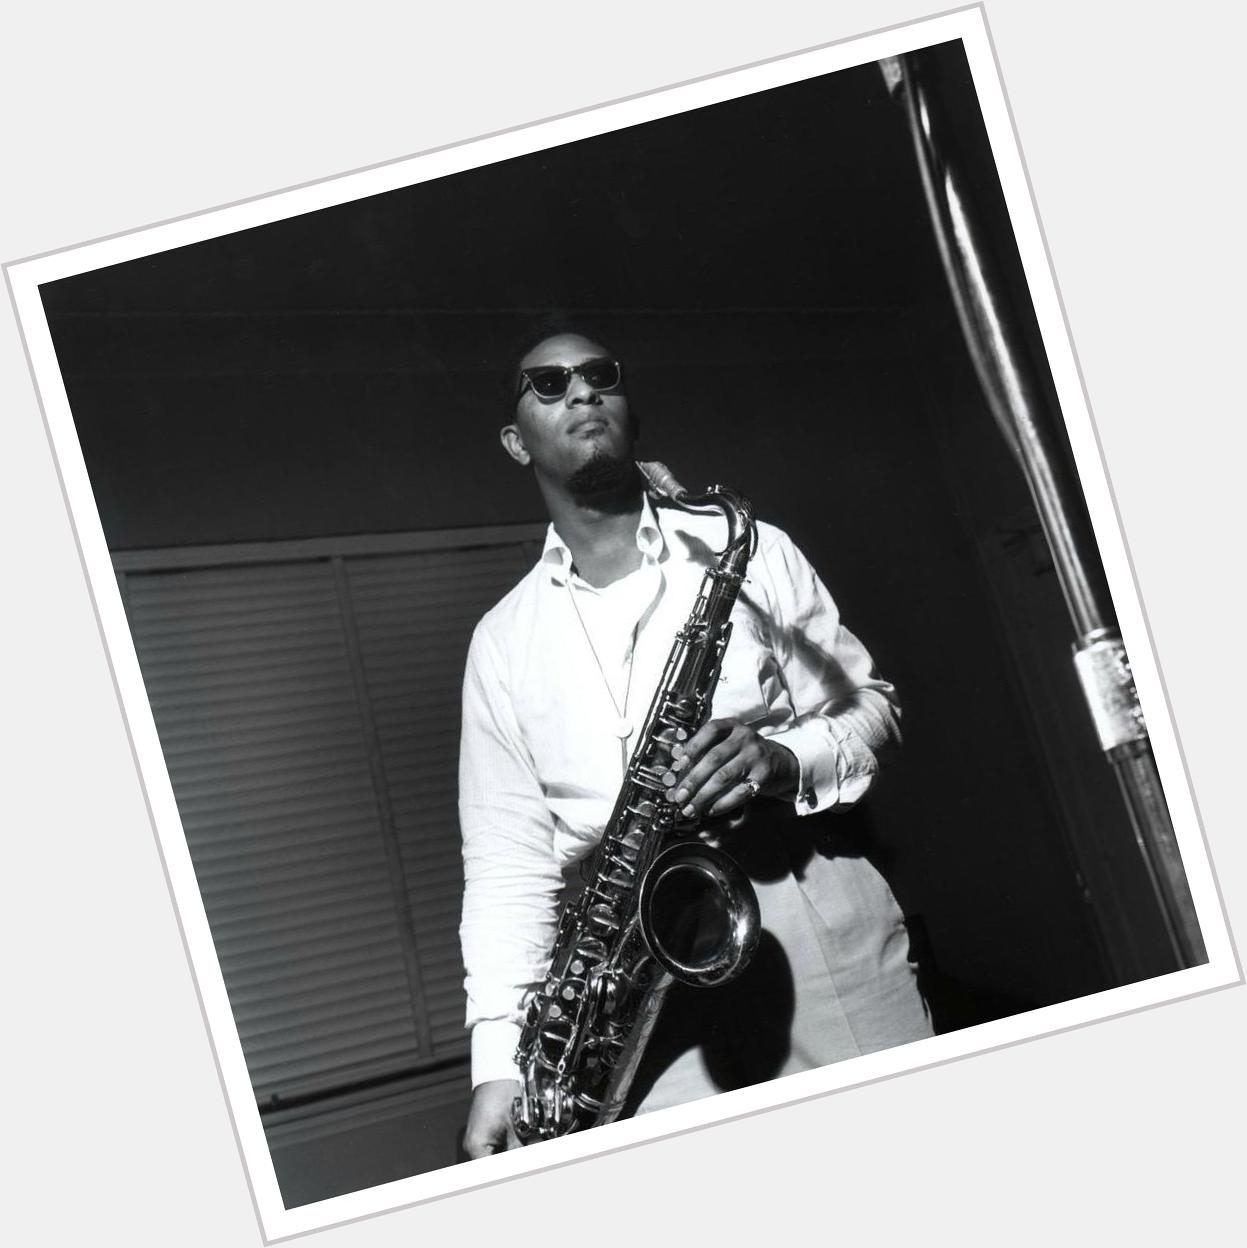 Happy 85th birthday to the Saxophone Colossus, Sonny Rollins! 